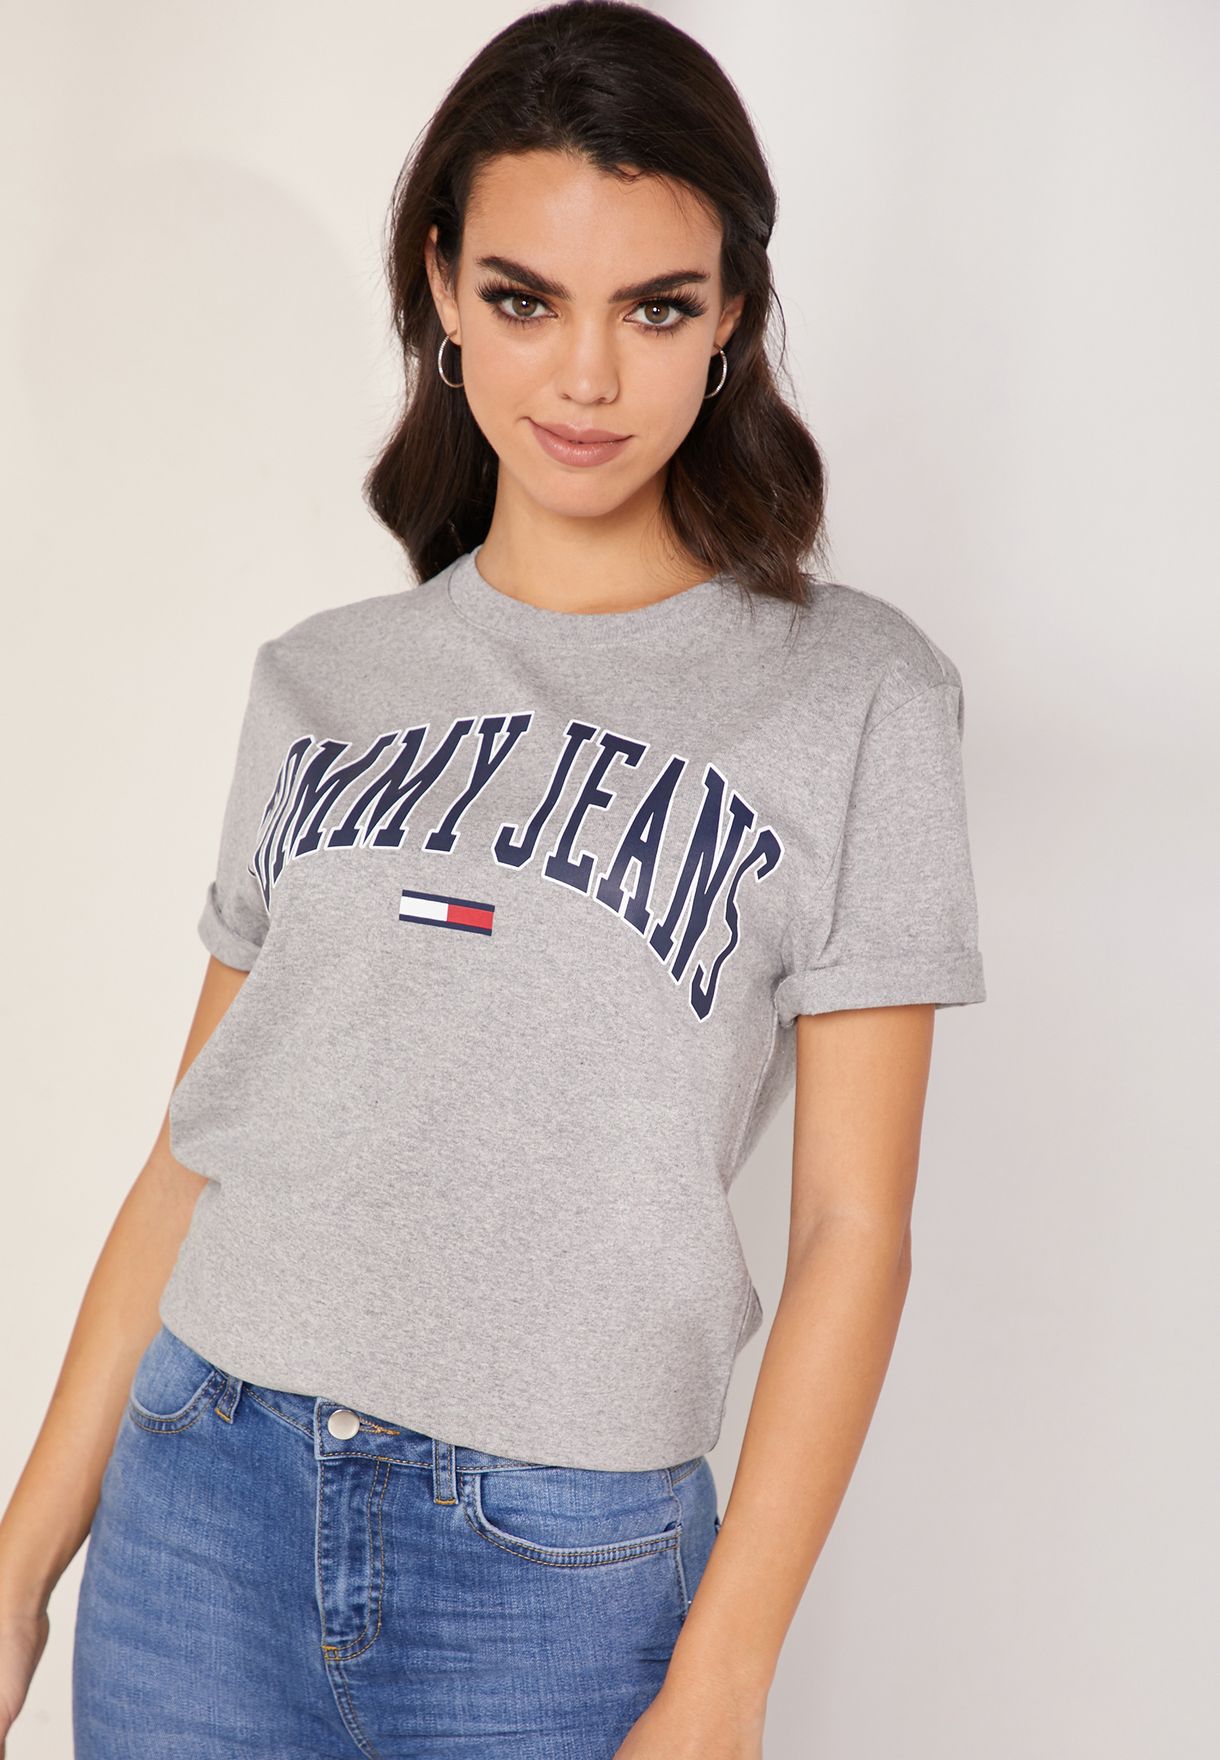 tommy t shirt for women